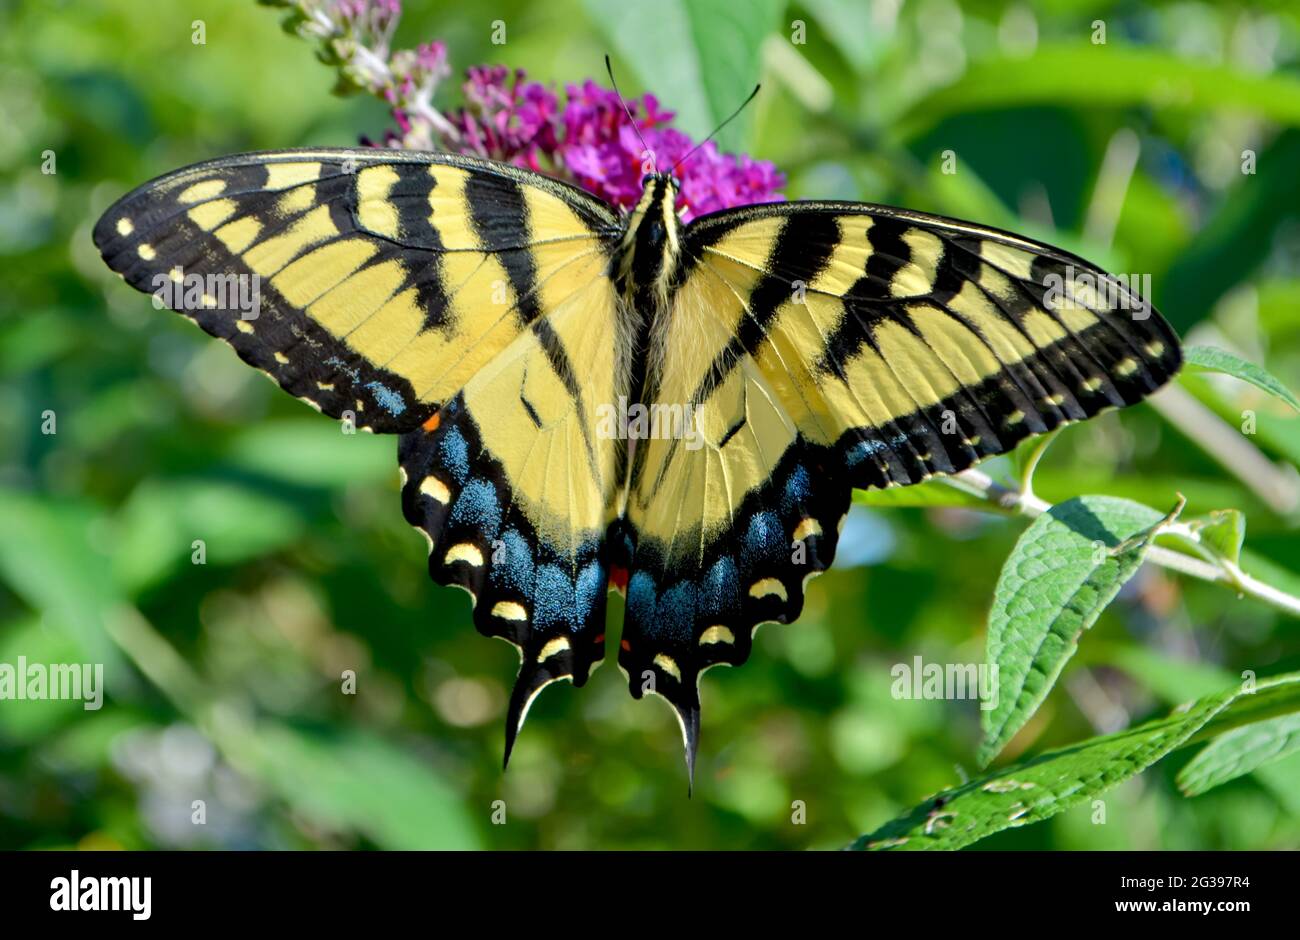 Closeup of an Eastern Tiger Swallowtail Butterfly (Papilio glaucus) drinking nectar from the flowers of a purple Butterfly Bush (Buddleia davidii). Stock Photo